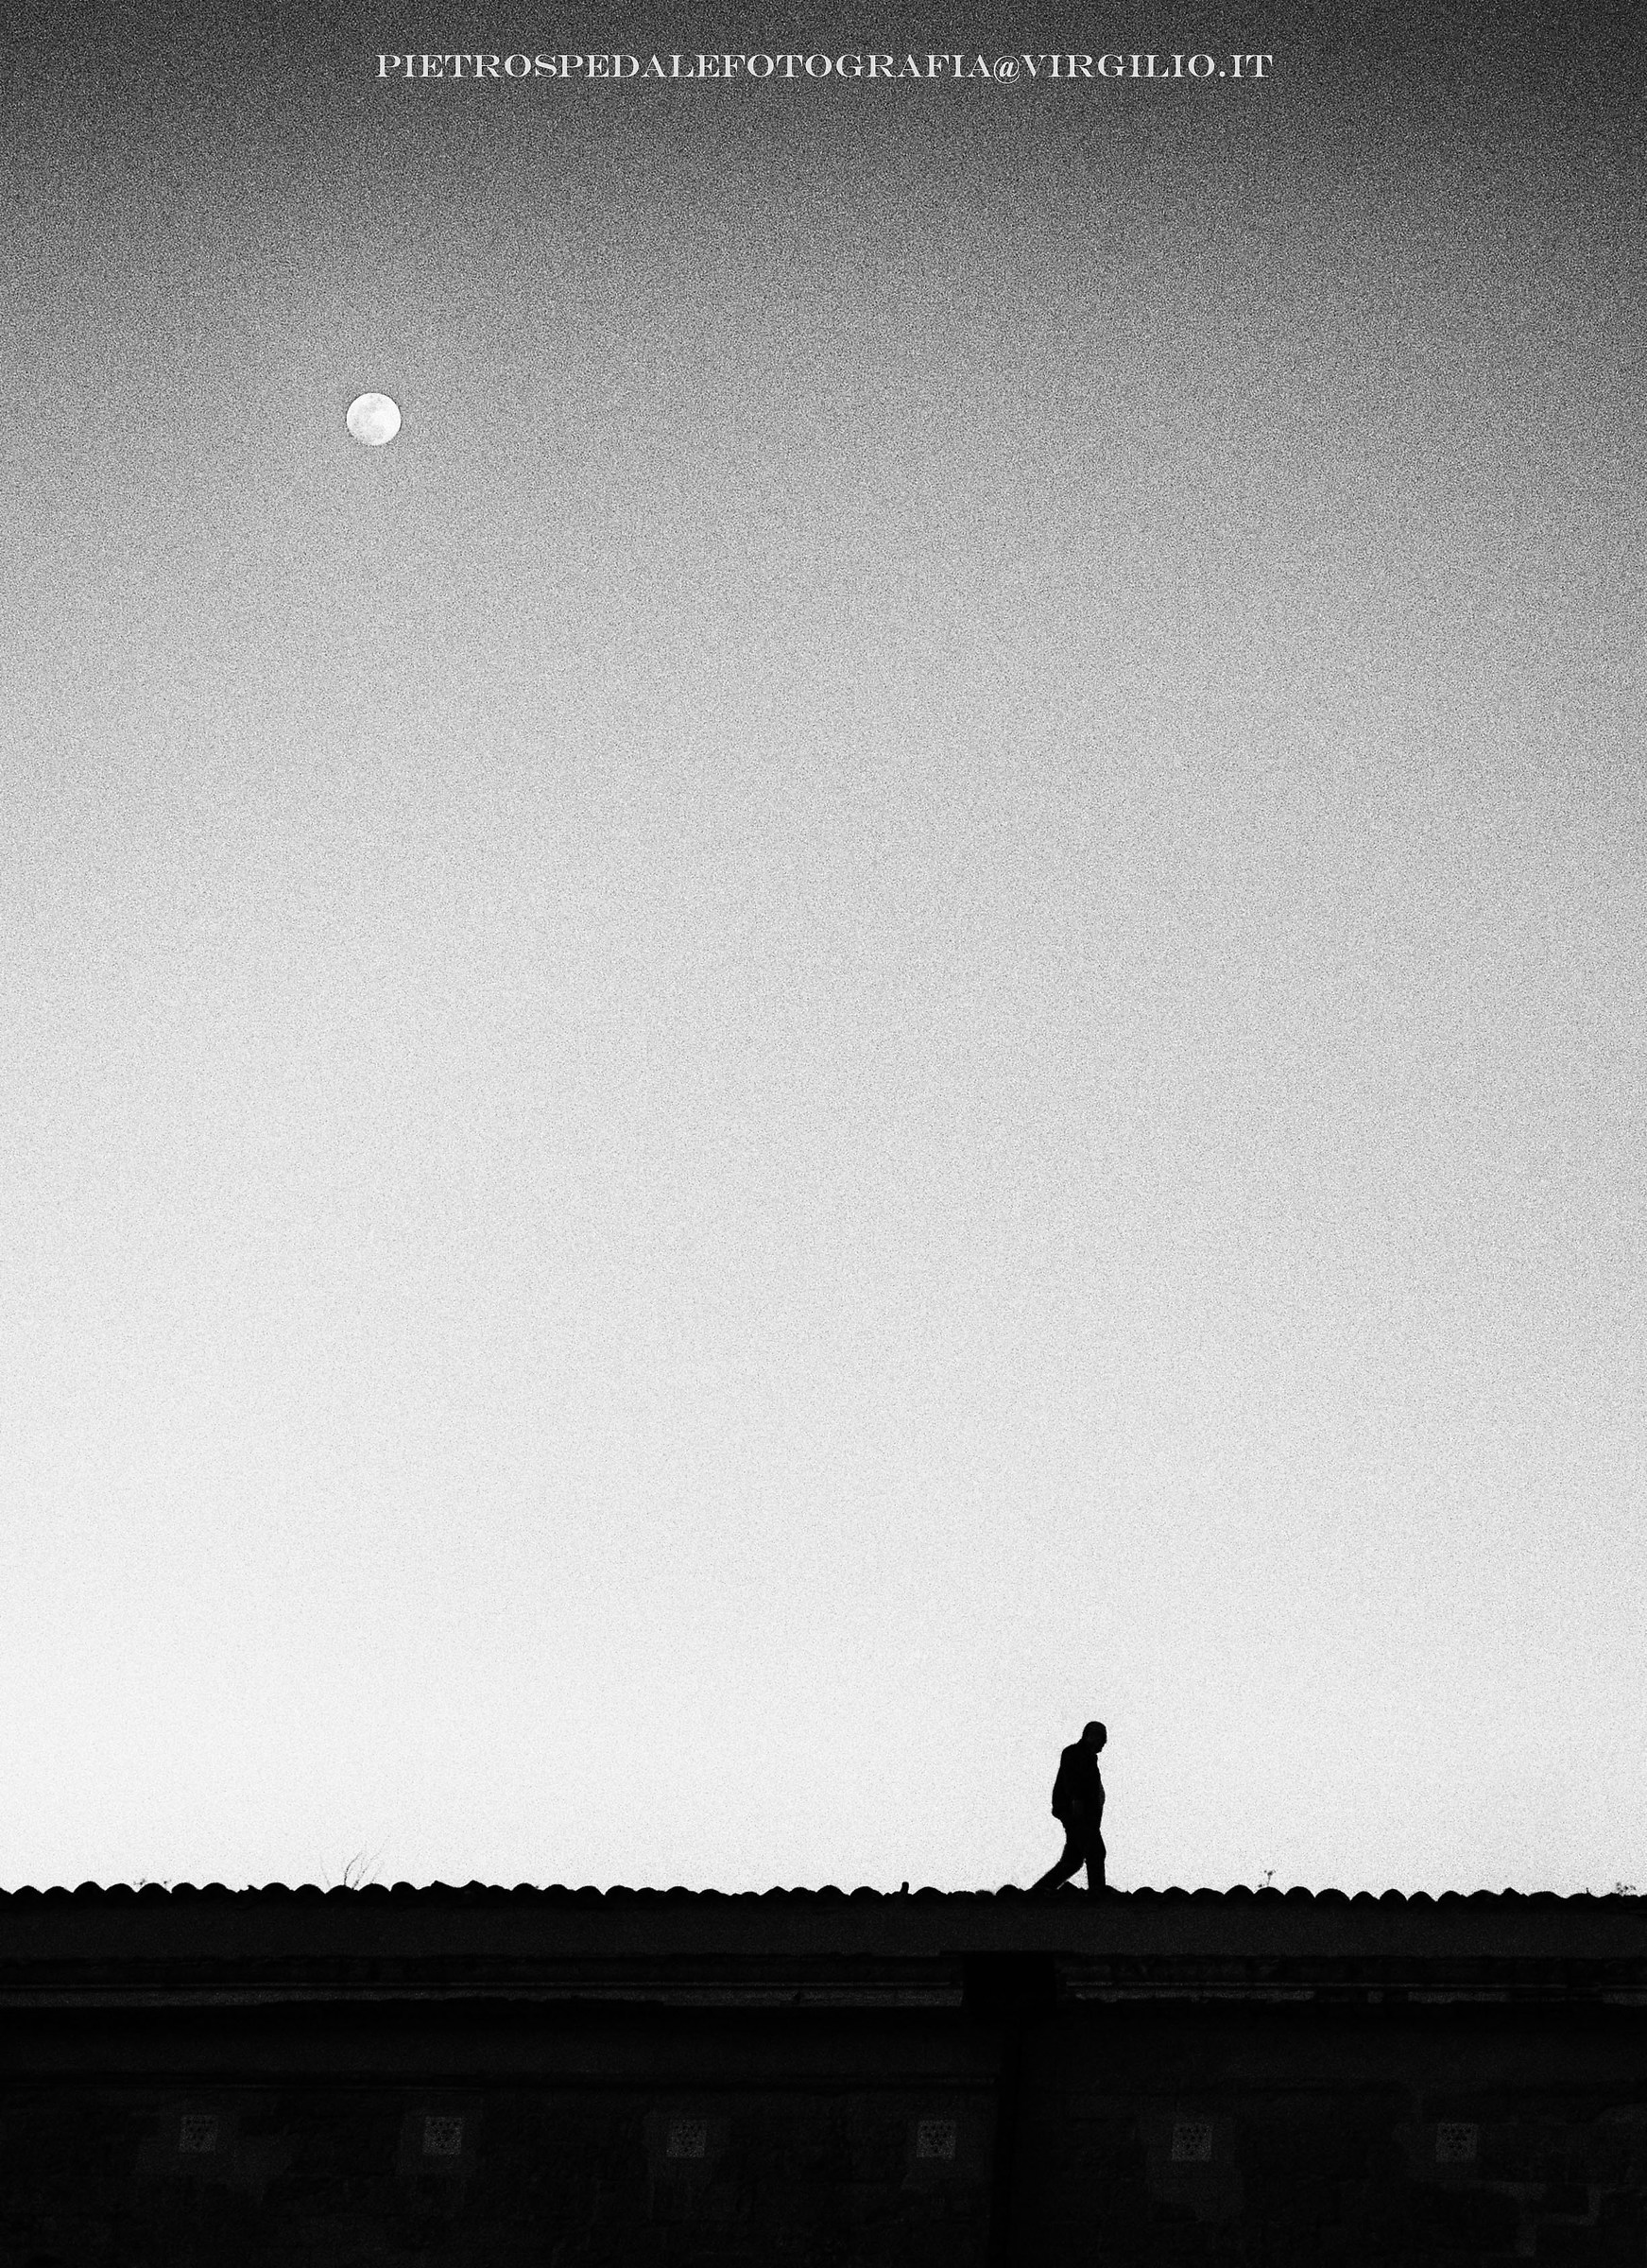 The Man and the Moon...